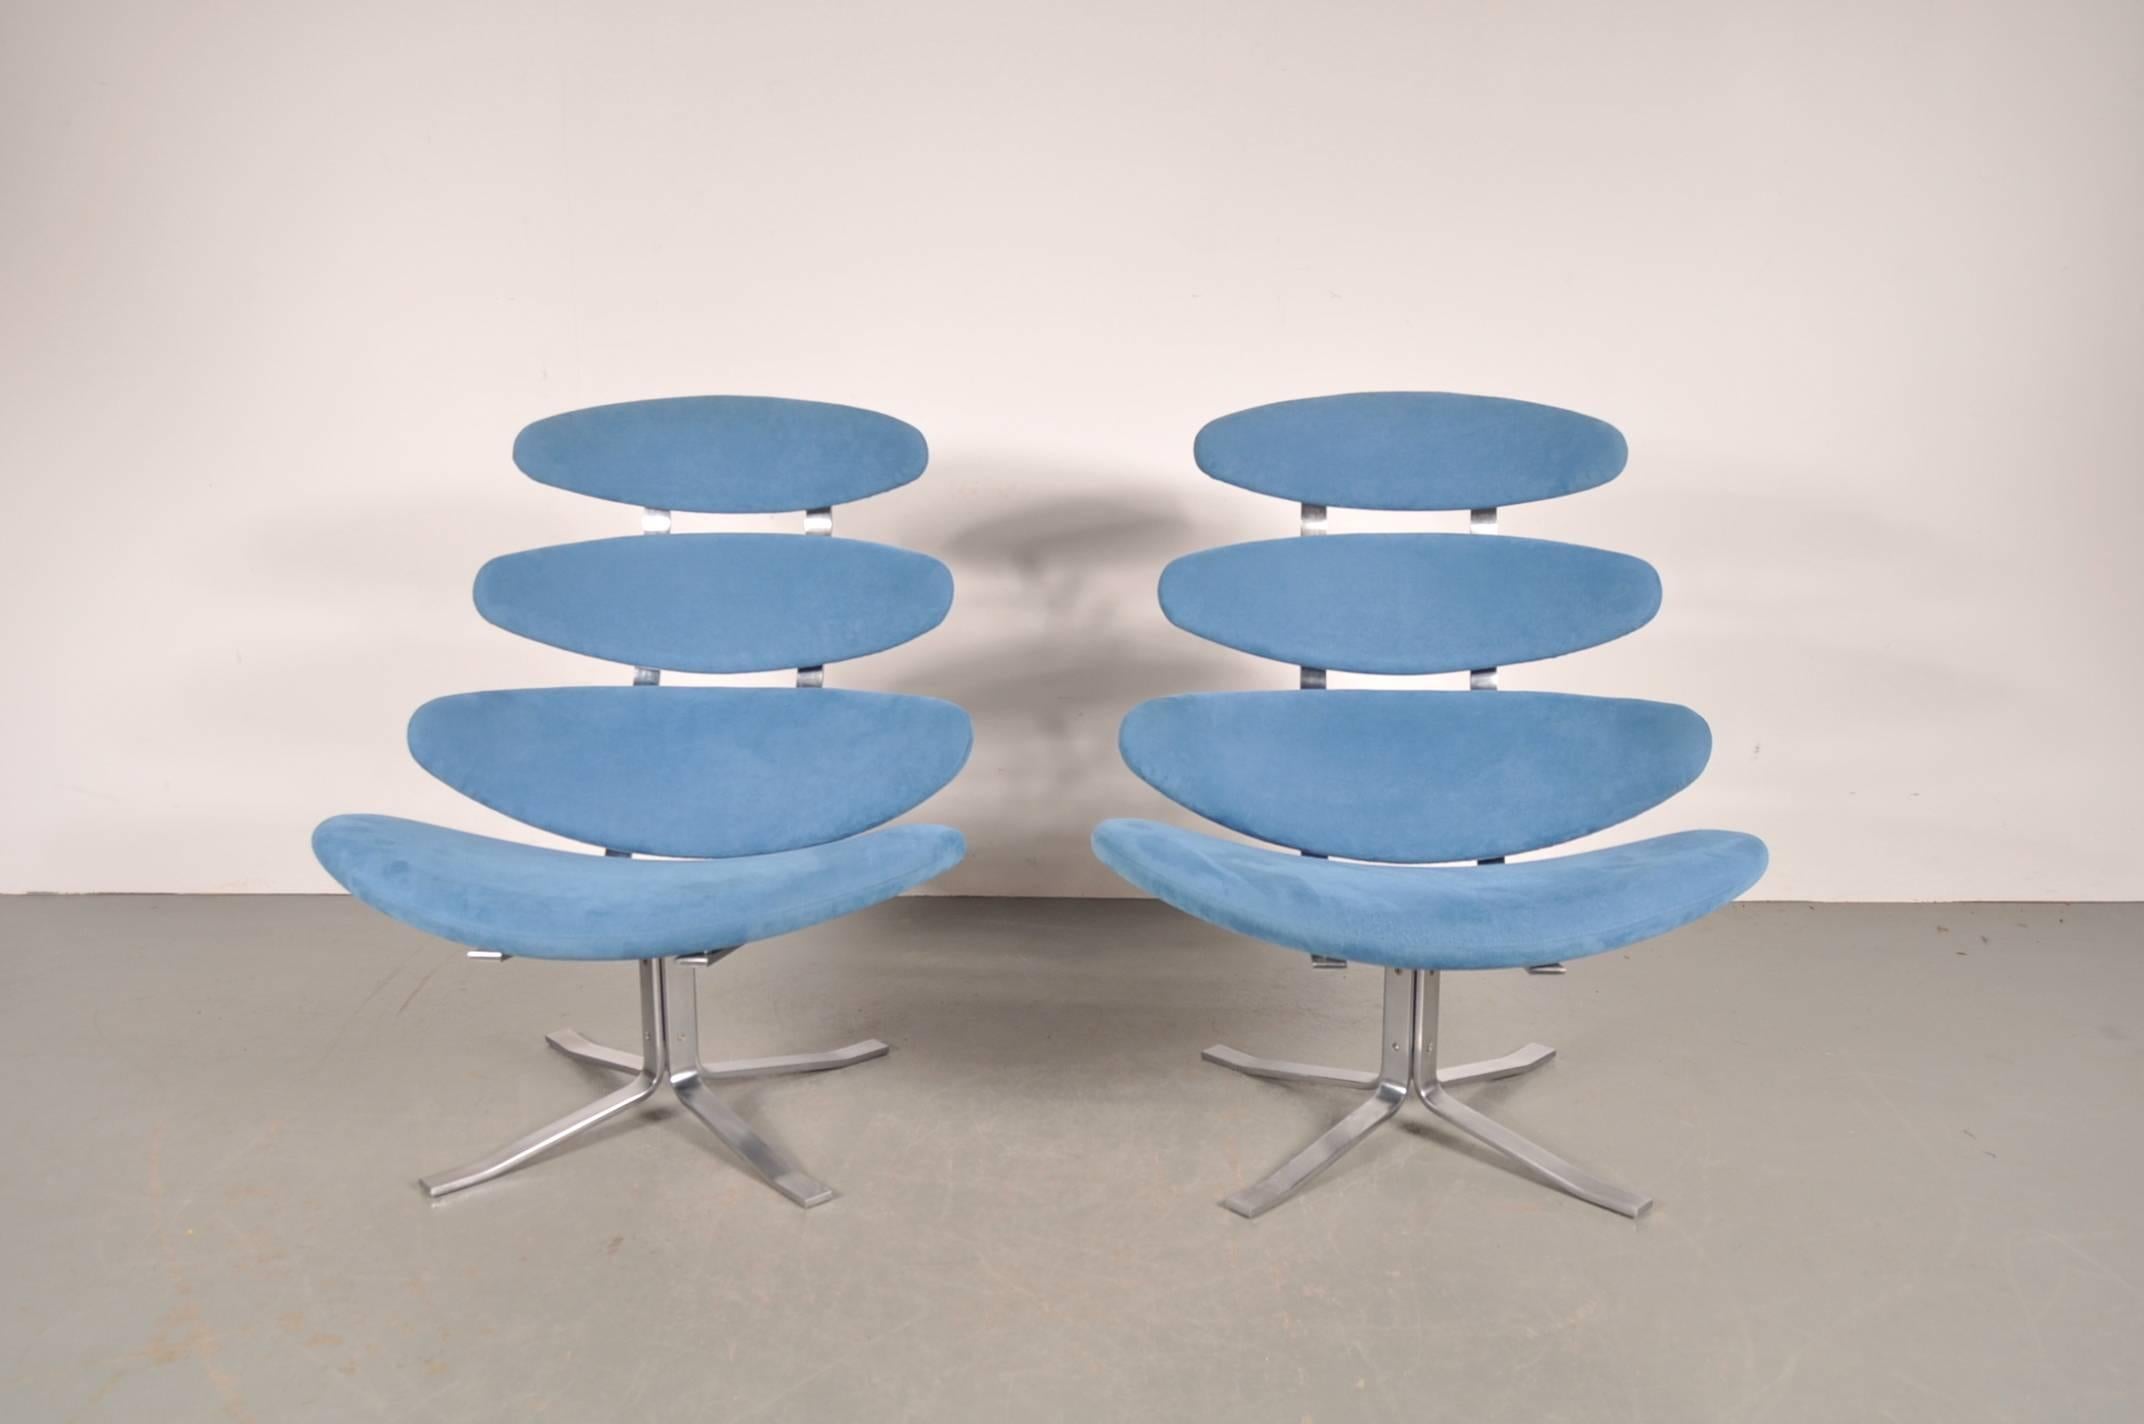 Danish Set of Two Corona Chairs by Poul Volther for Erik Jorgensen, Denmark, 1964